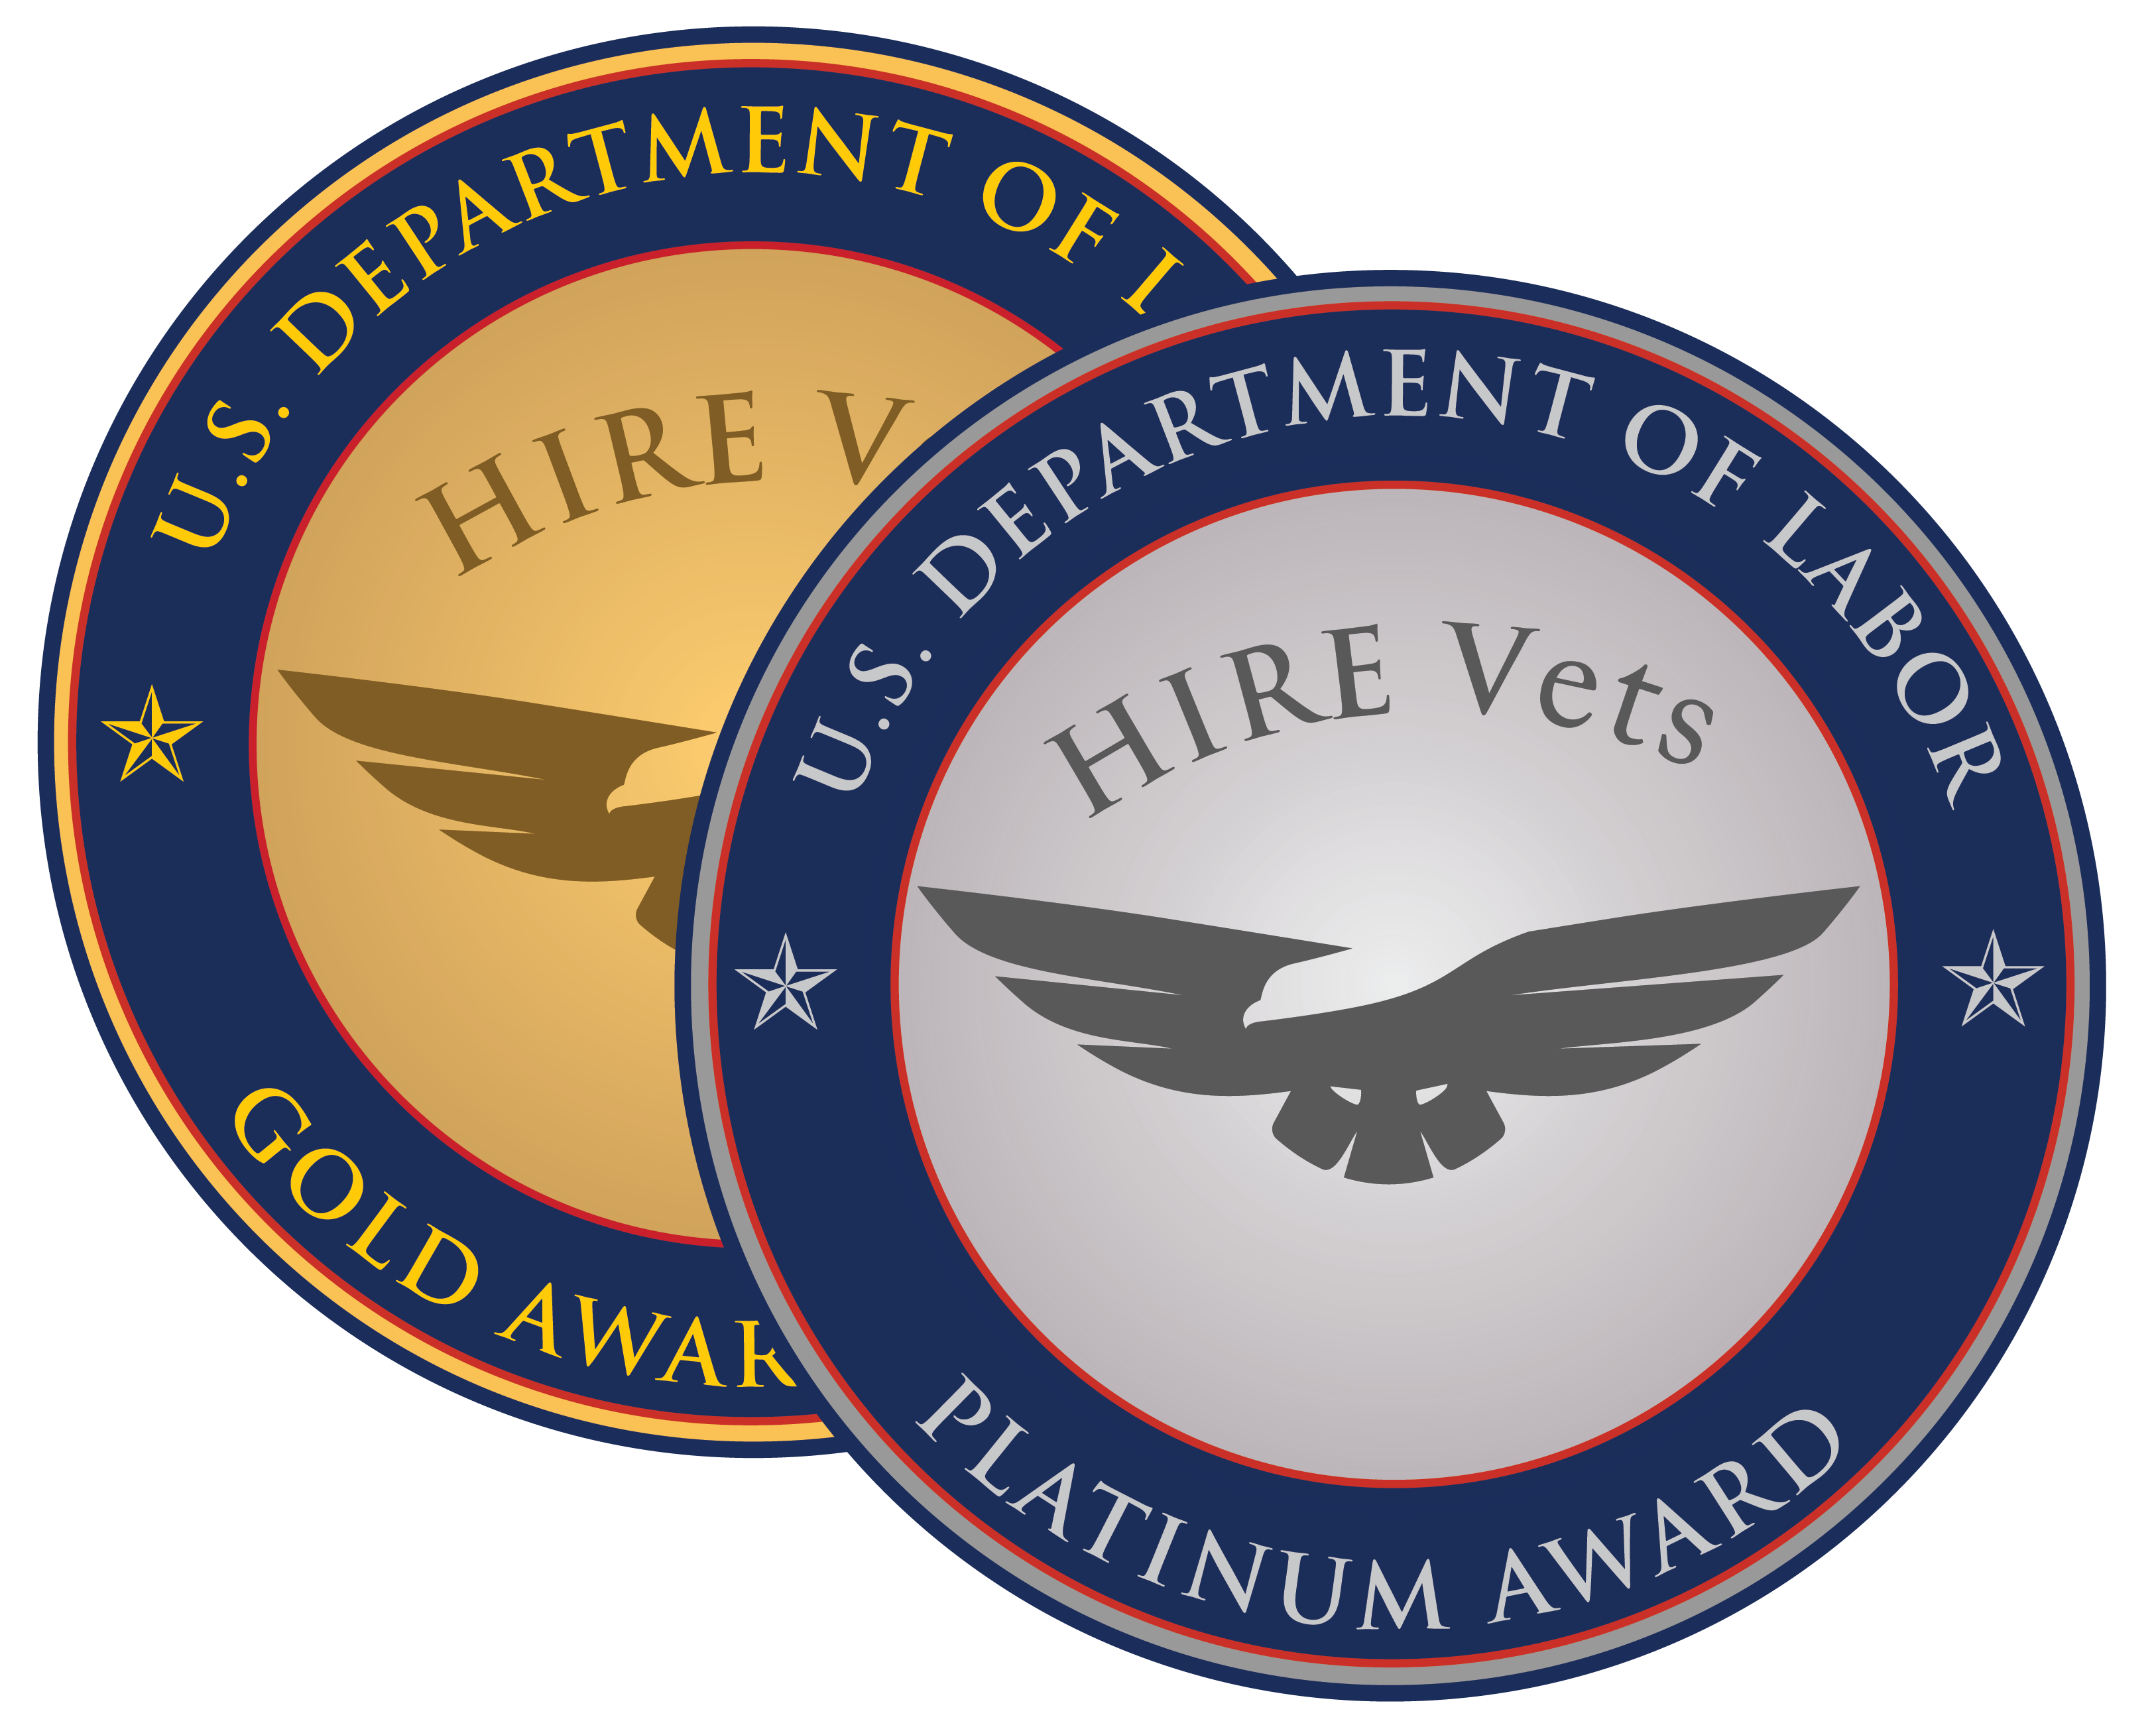 A&M TRANSPORT RECEIVES 2021 HIRE VETS MEDALLION AWARD FROM THE U.S. DEPARTMENT OF LABOR